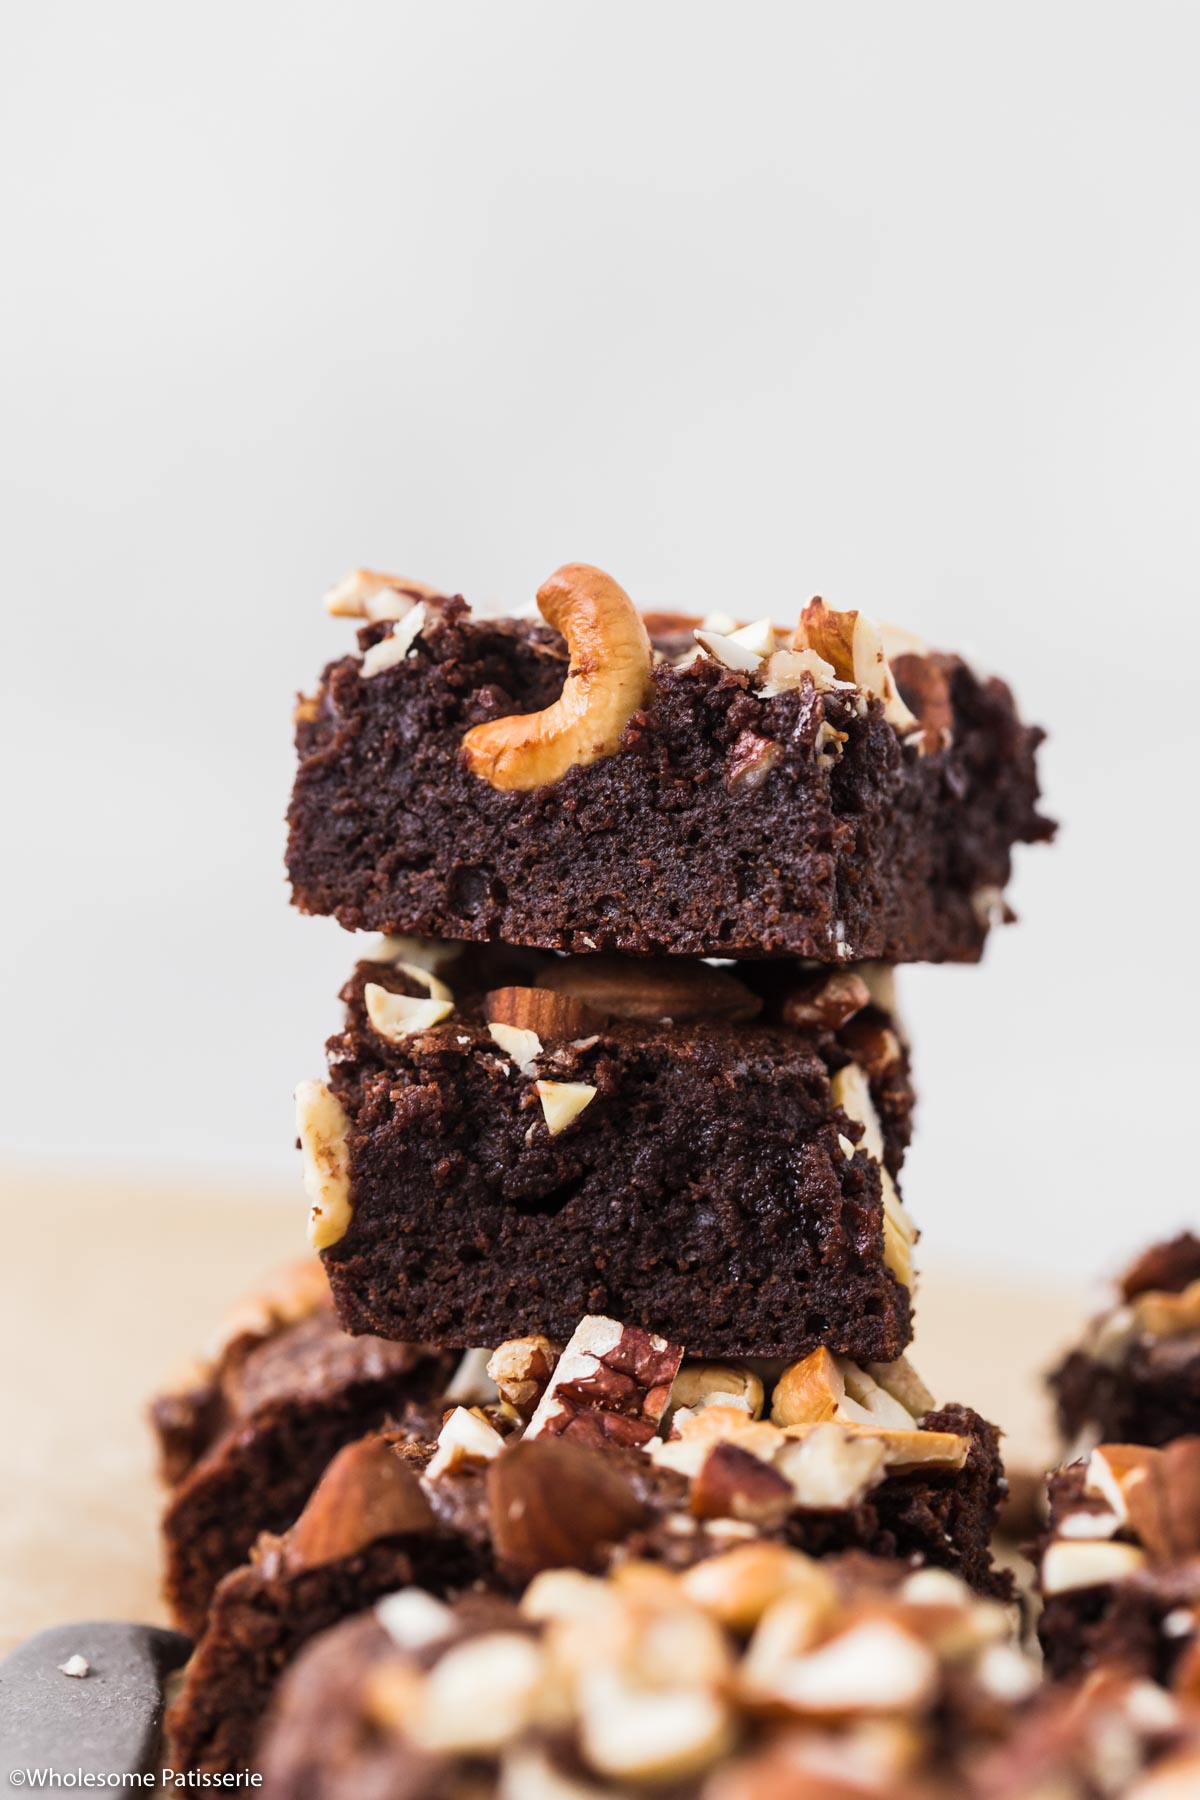 Close up shot of a brownie slice showing the fudgy texture and nuts on top